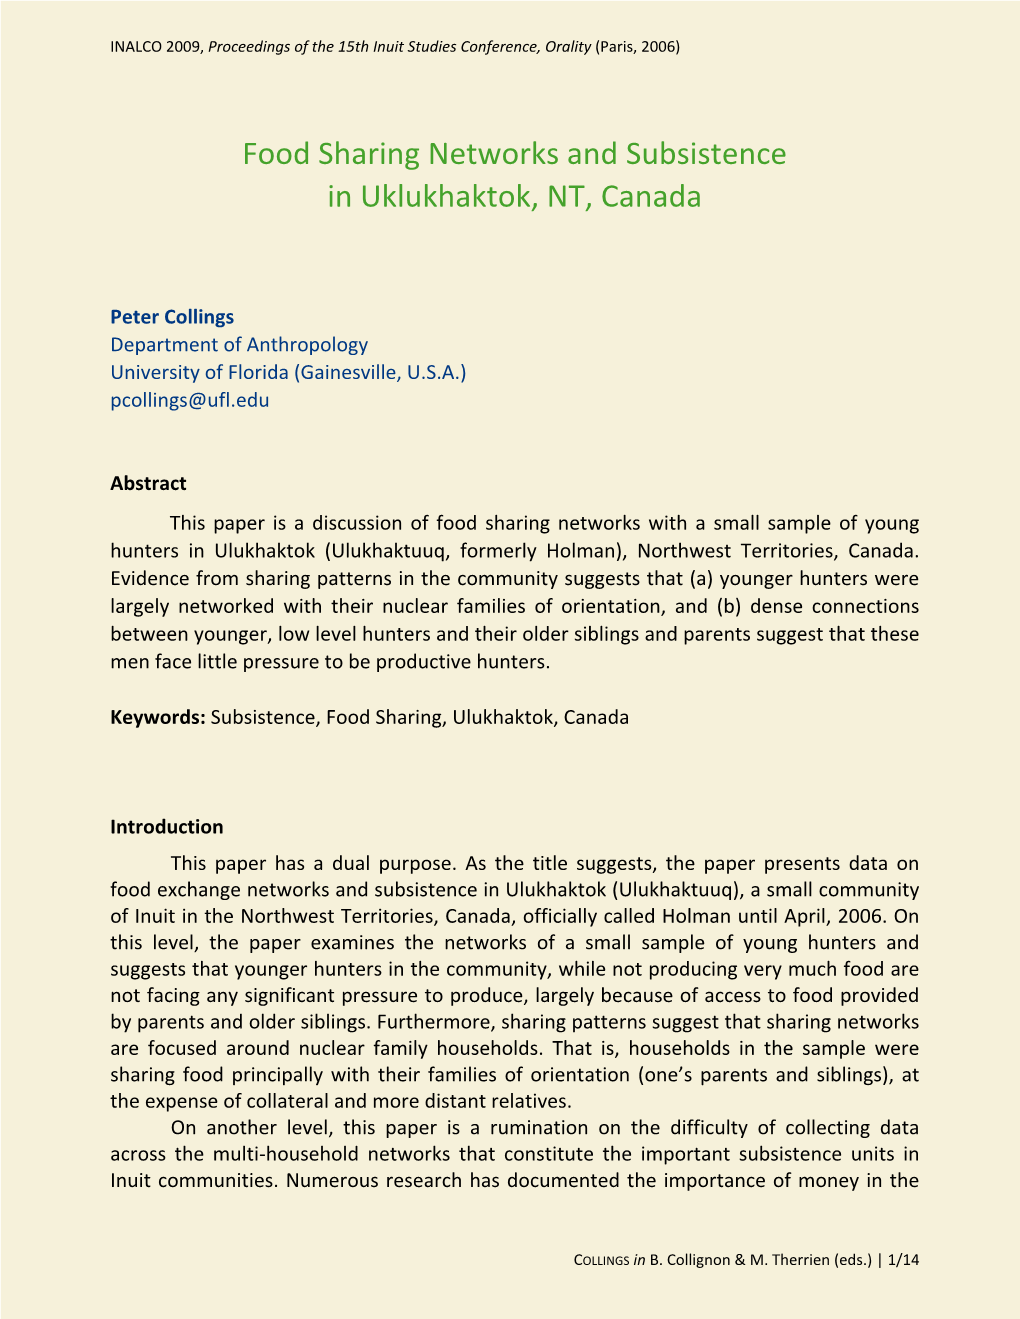 Food Sharing Networks and Subsistence in Uklukhaktok, NT, Canada